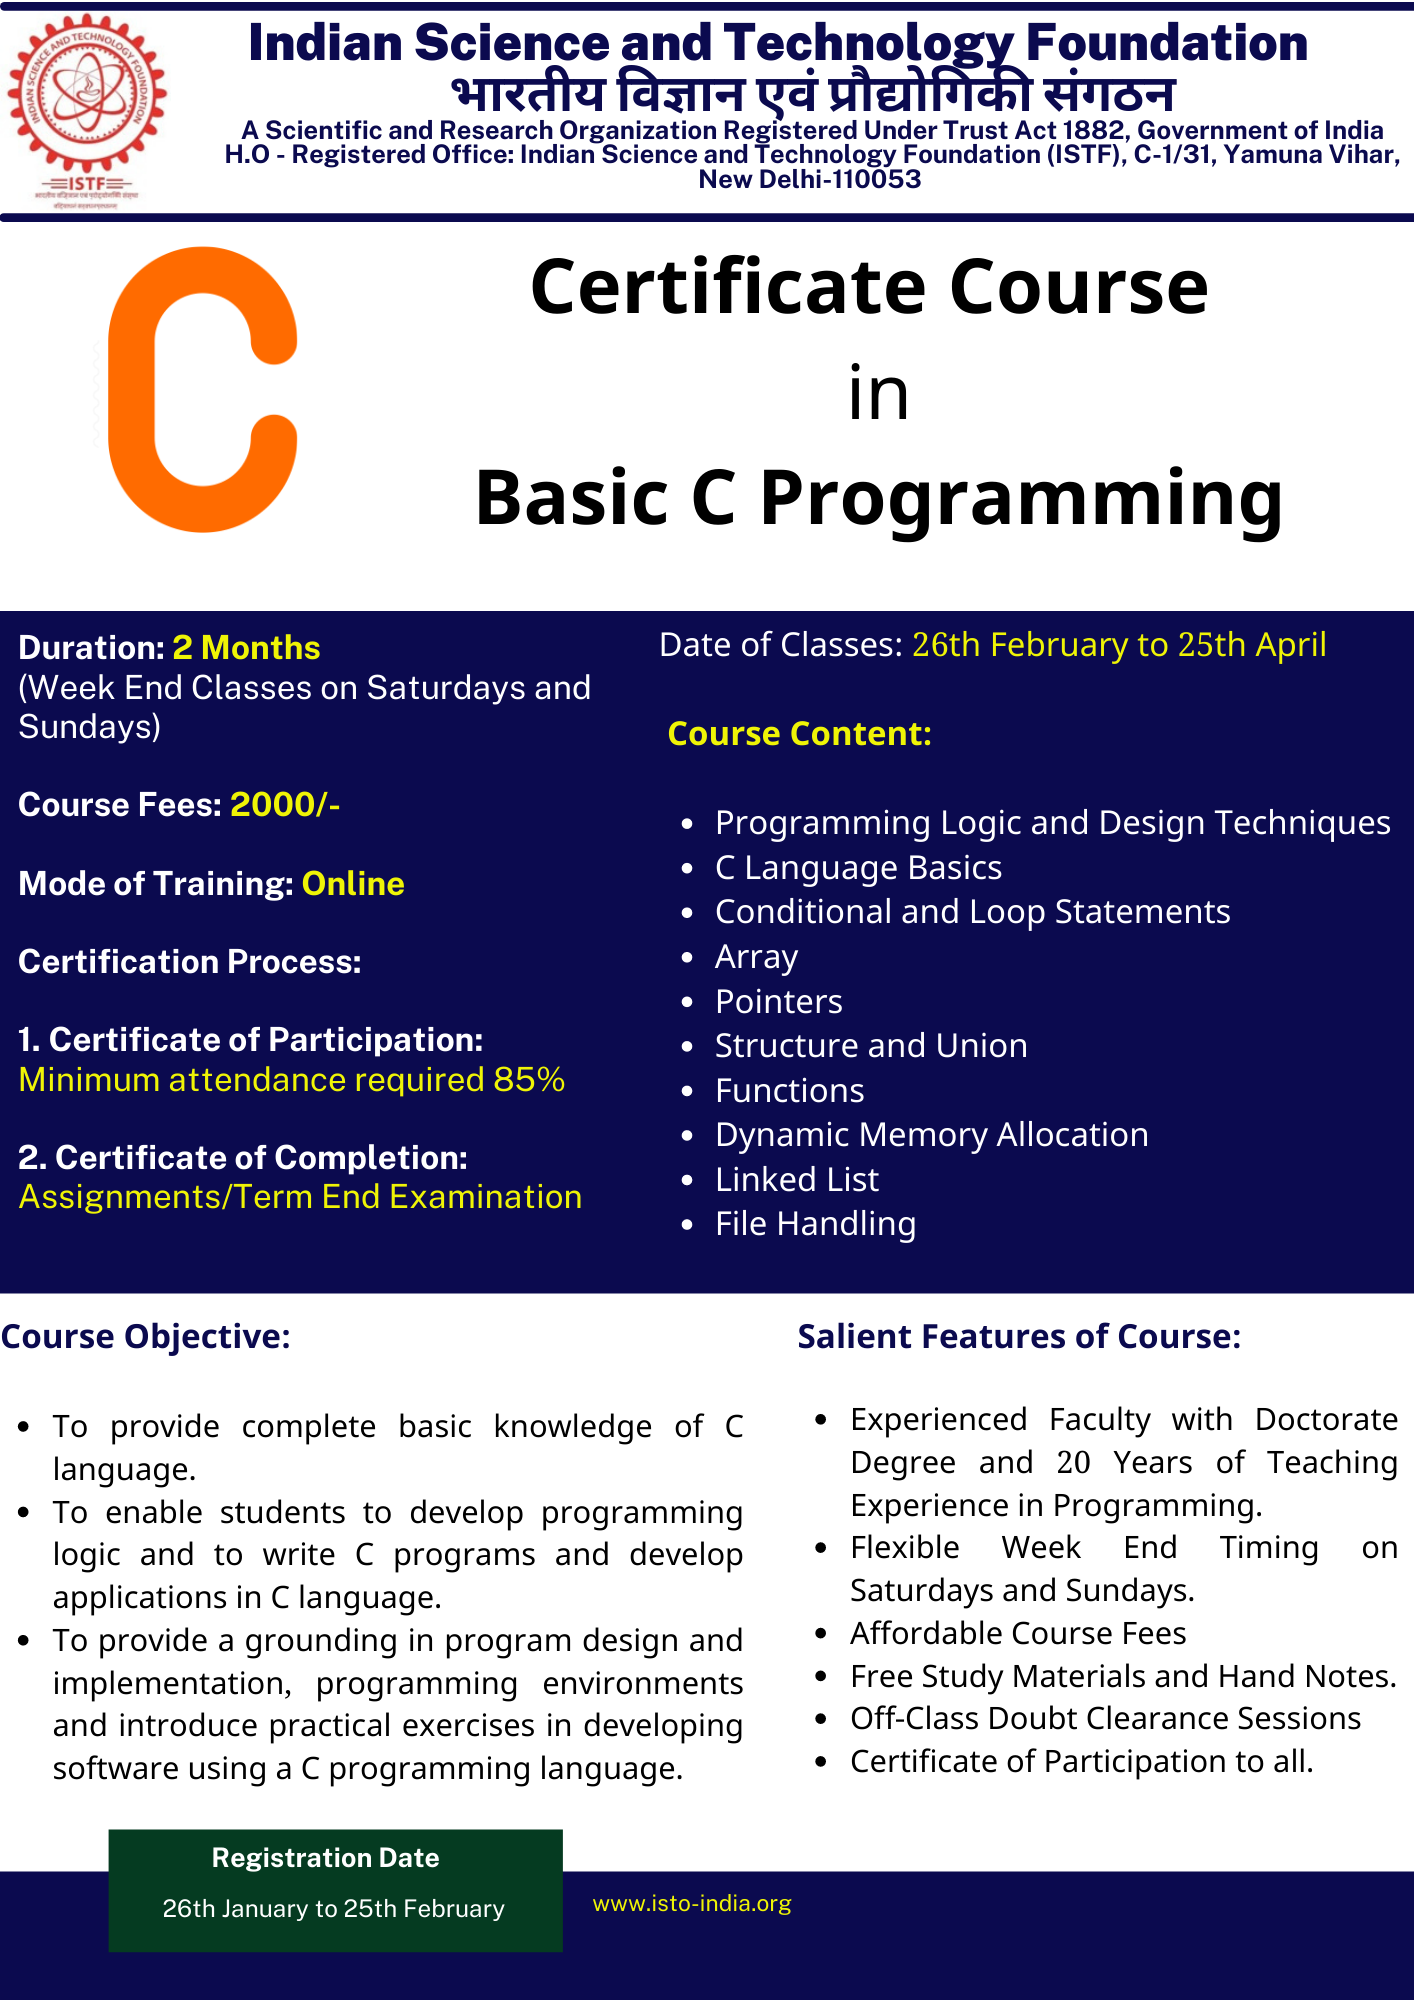 Certificate Course in Basic C Programming